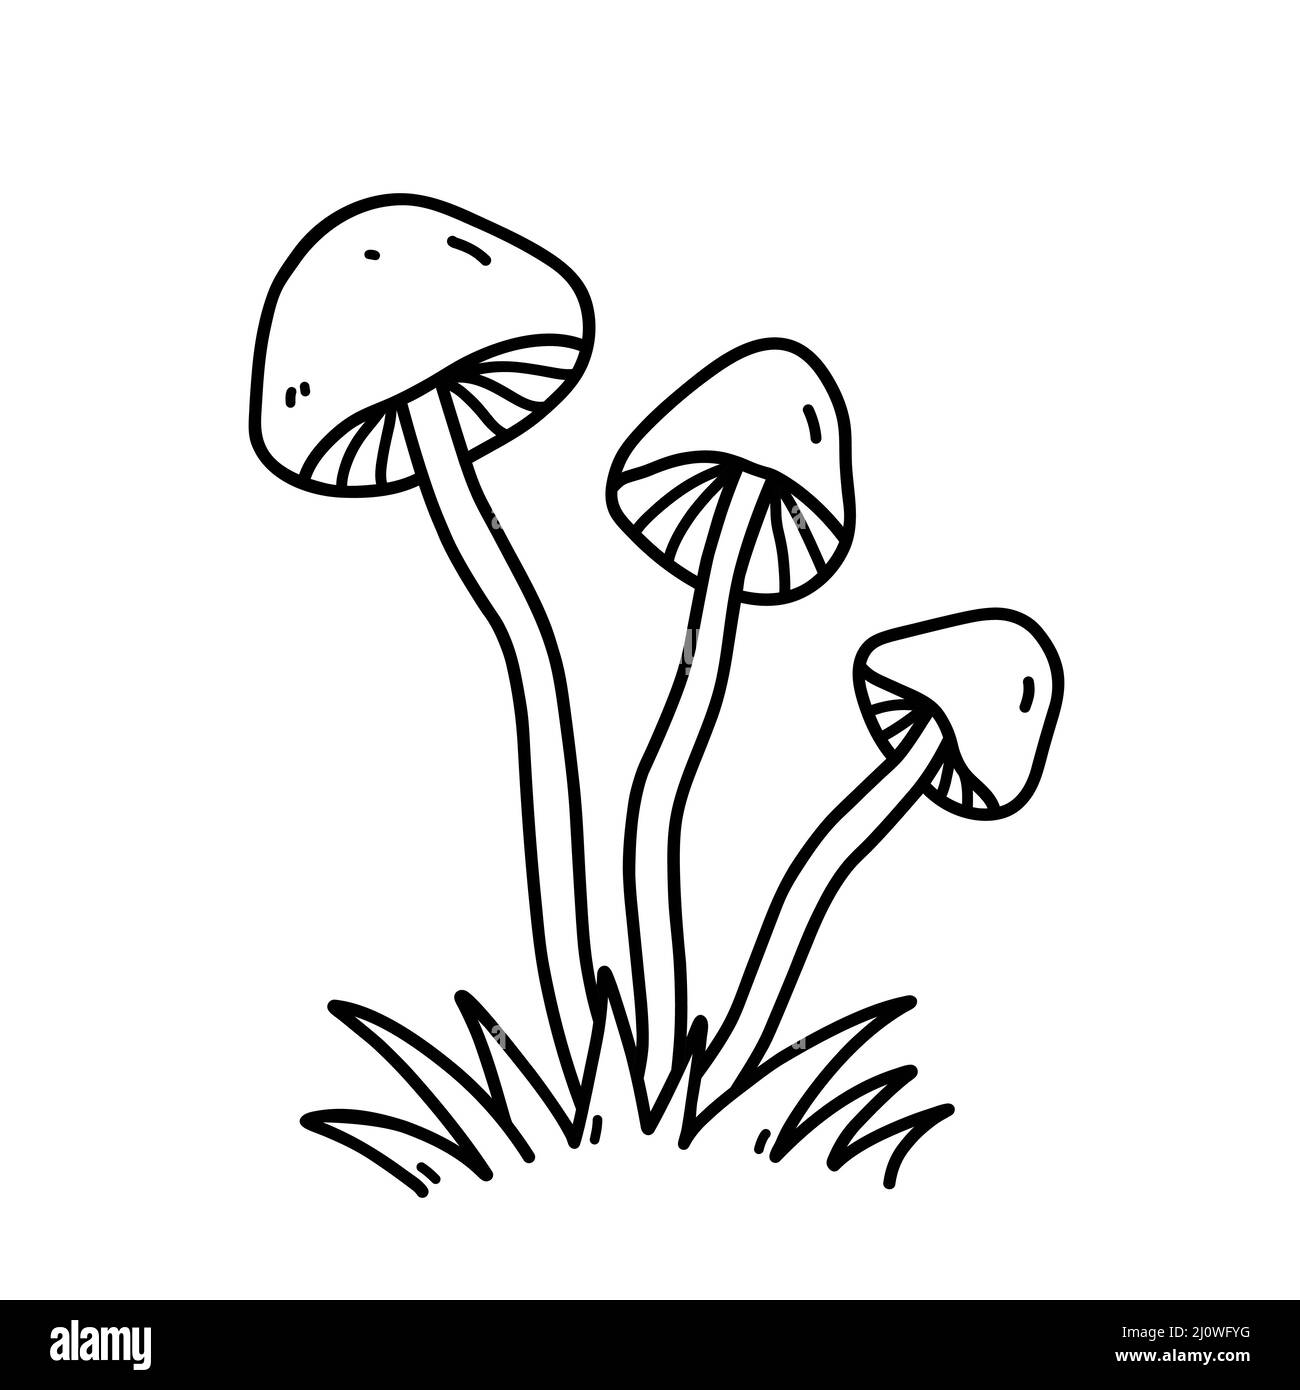 Mushrooms in the grass isolated on white background. Poisonous toadstool. Vector hand-drawn illustration in doodle style. Perfect for cards, decor Stock Vector